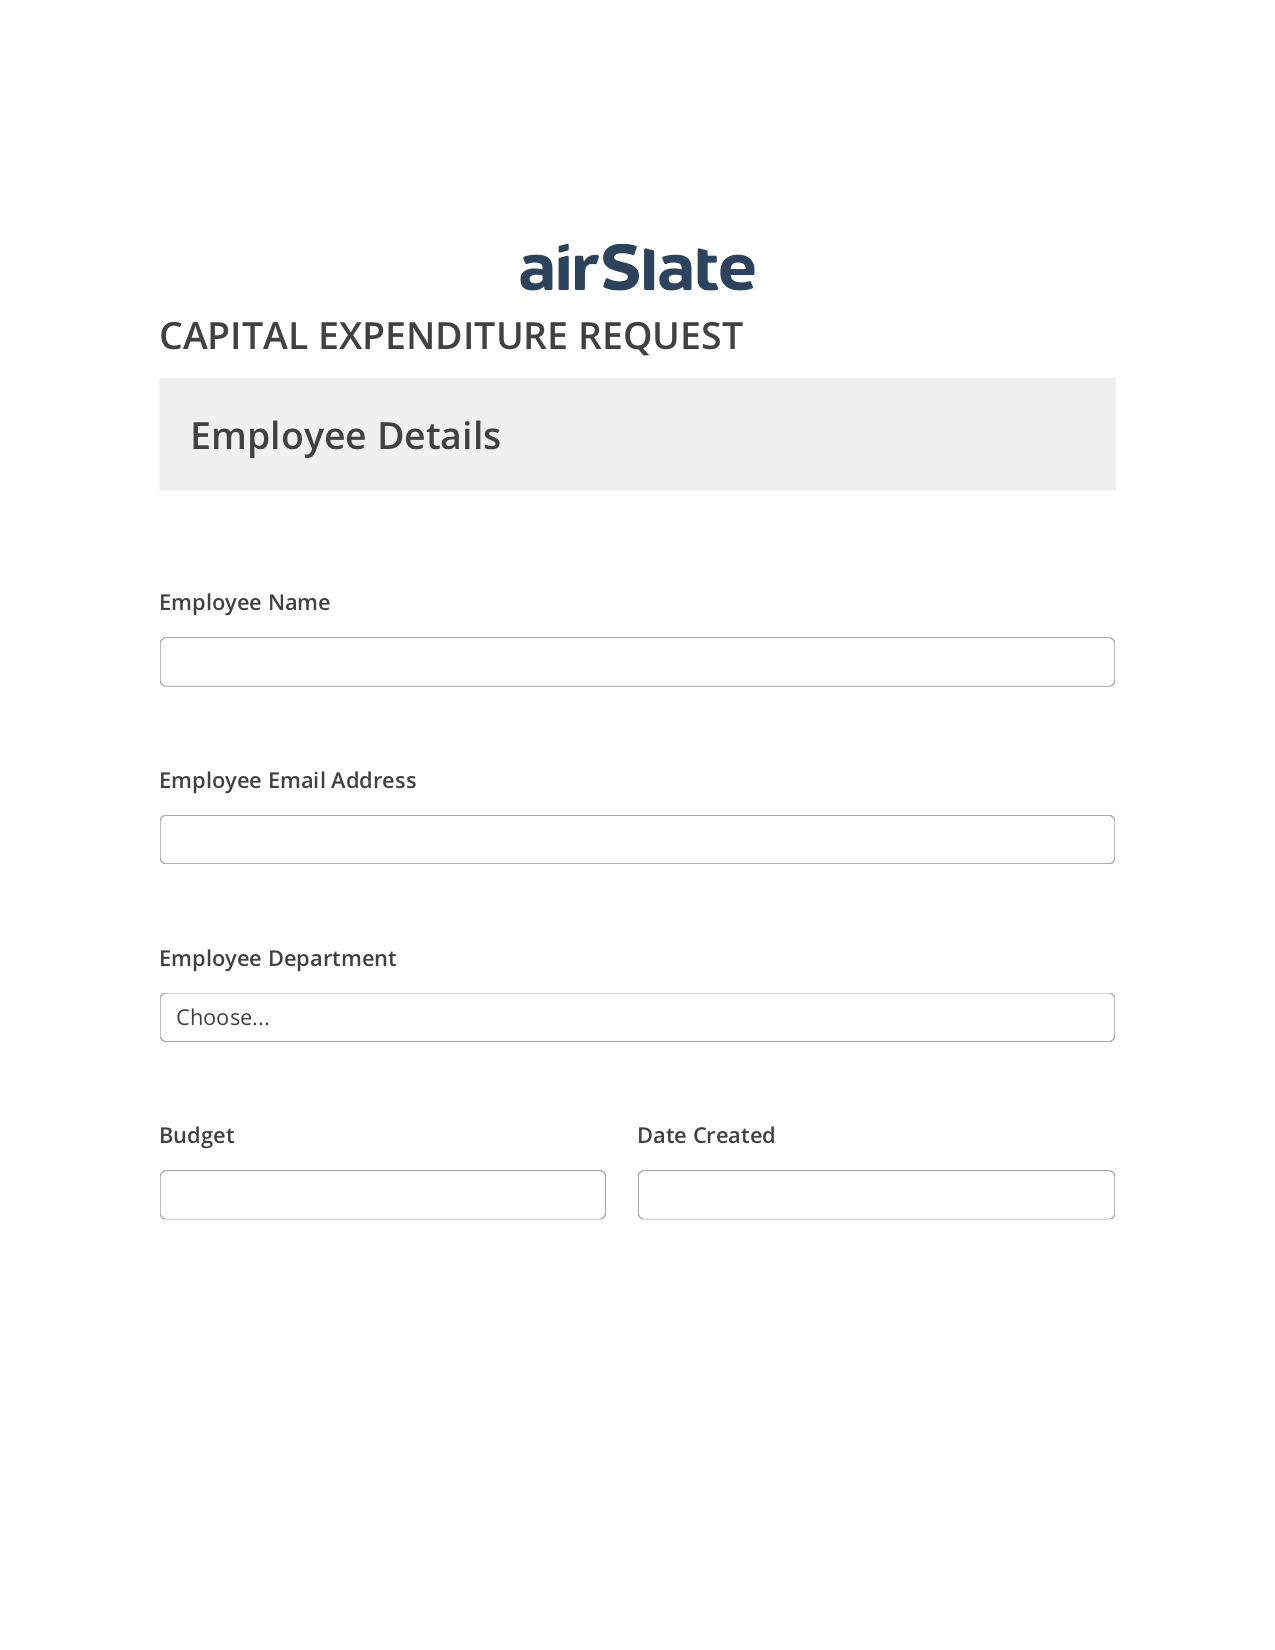 Capital Expenditure Request Approval Workflow Pre-fill from Litmos bot, SendGrid send Campaign bot, Archive to OneDrive Bot